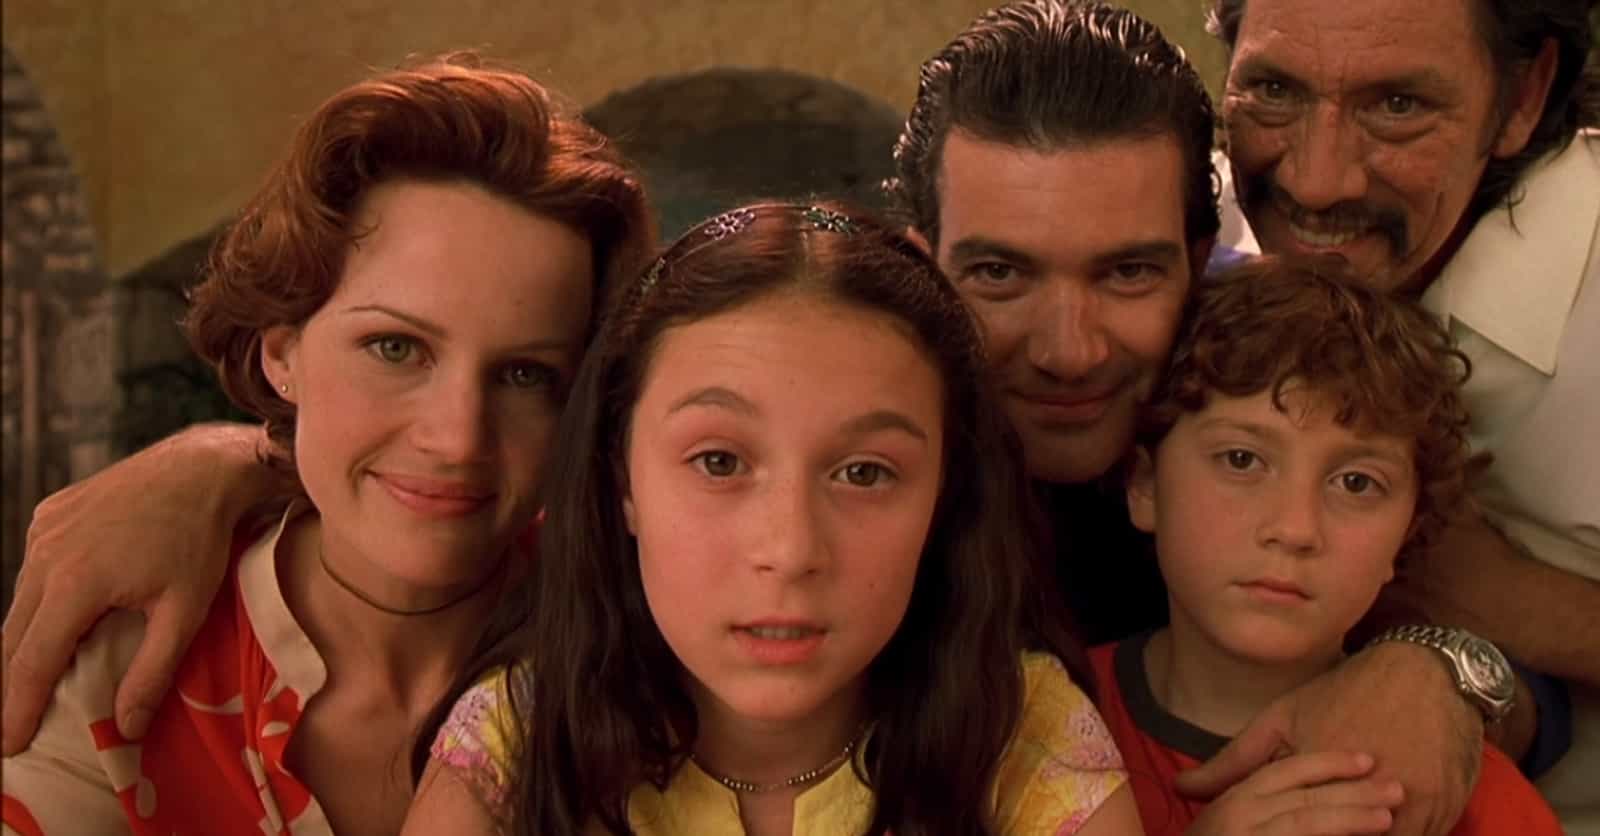 'Spy Kids' Is, Far And Away, One Of The Most Unsettling Kids Movies Ever Made